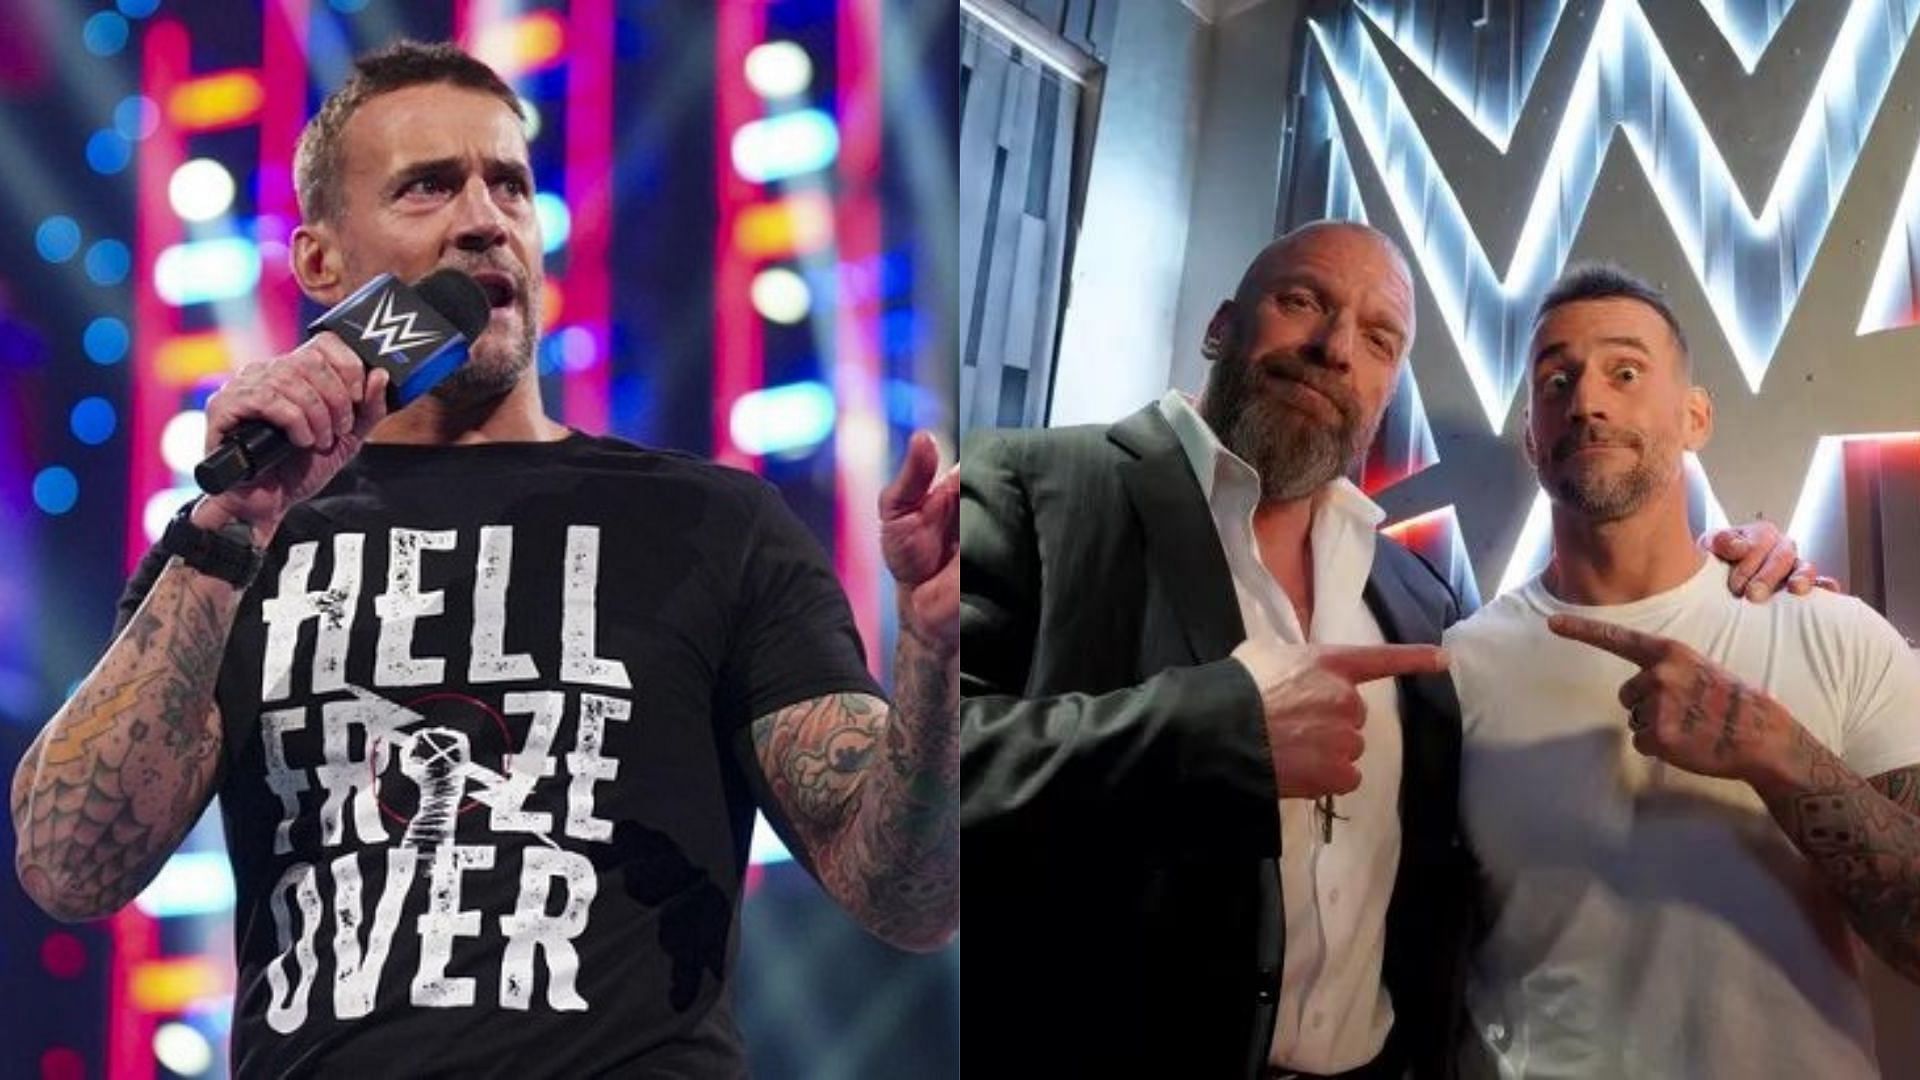 CM Punk made his return to WWE at the Survivor Series PLE